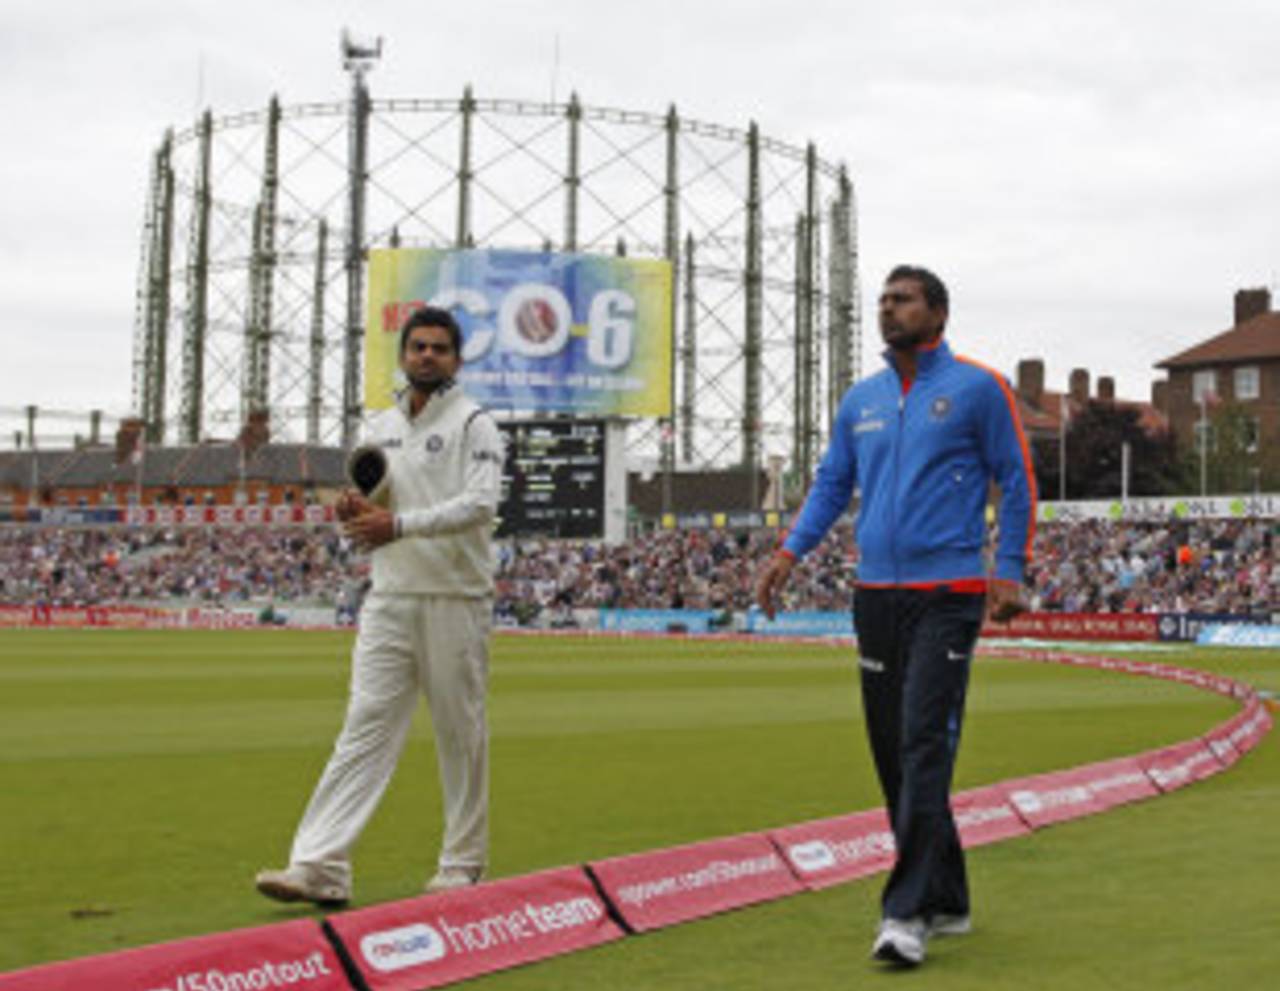 Praveen Kumar, who missed the fourth Test due to injury, has a stroll with Virat Kohli, England v India, 4th Test, The Oval, 1st day, August 18, 2011